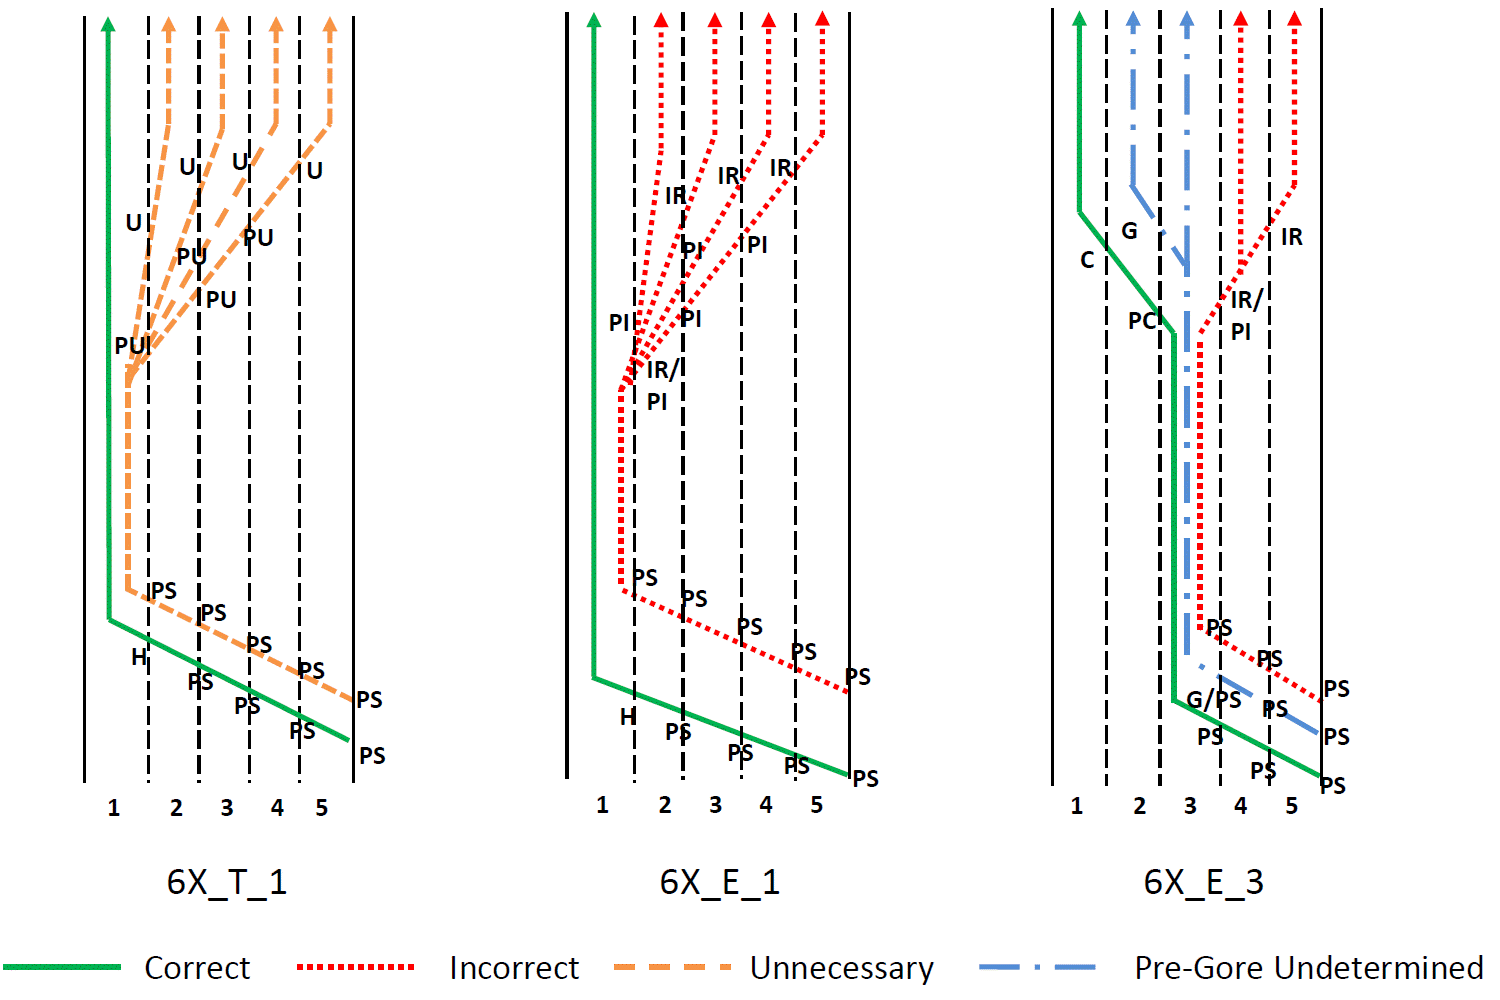 Figure 69. Illustration. Topic 6 lane change coding. The figure shows correct, incorrect, unnecessary, and pregore undetermined paths for each testing scenario in topic 6.